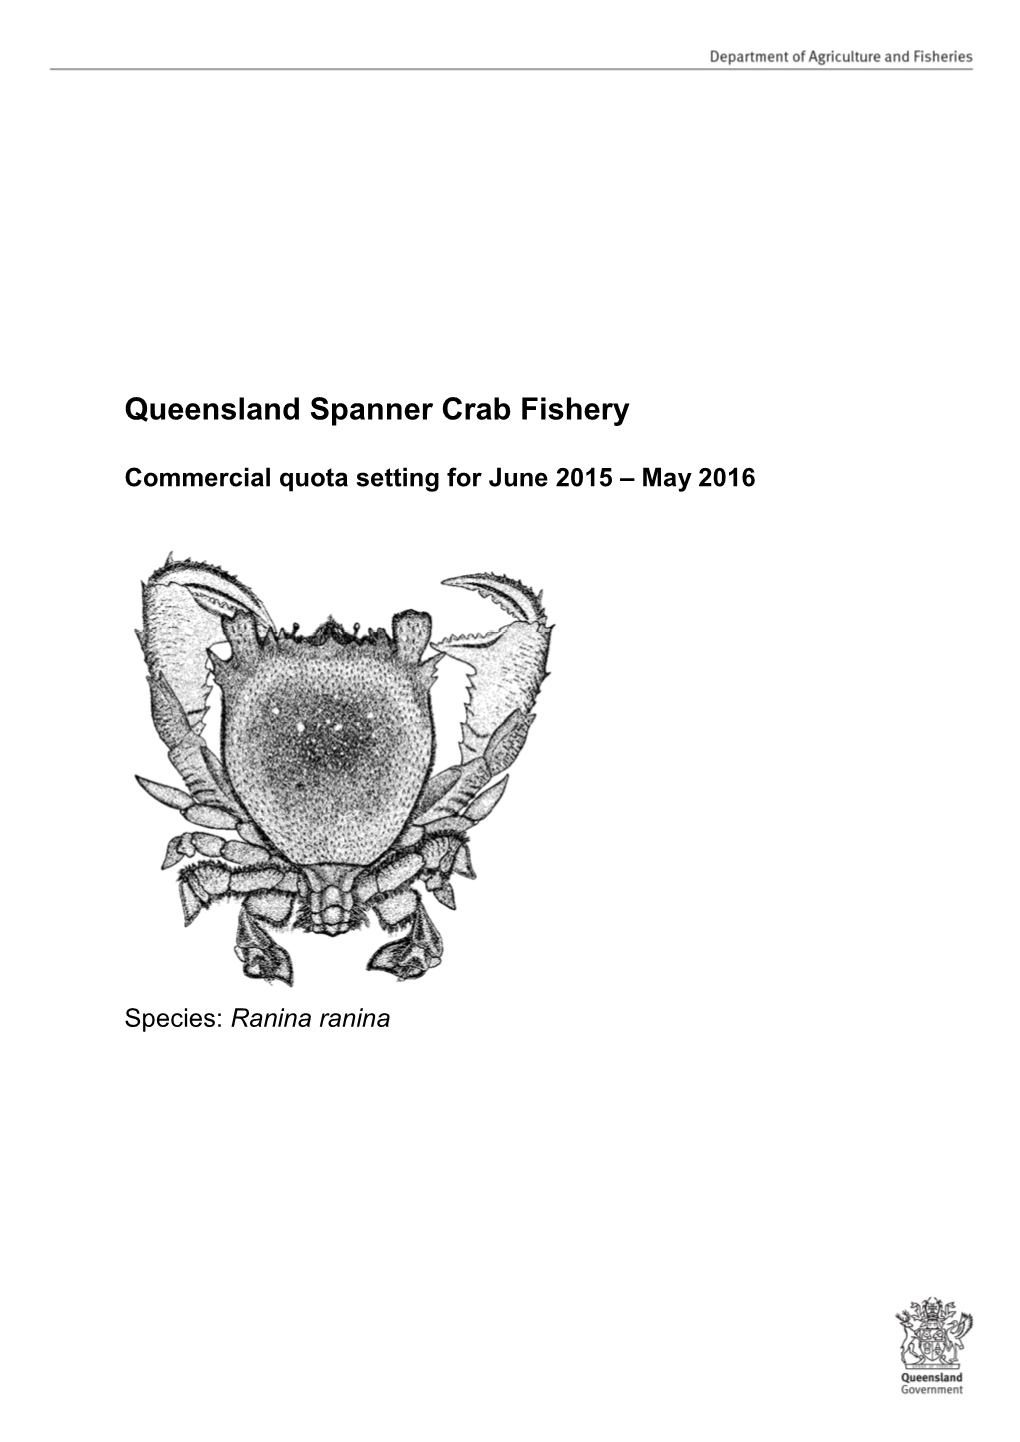 Queensland Spanner Crab Fishery : Commercial Quota Setting for June